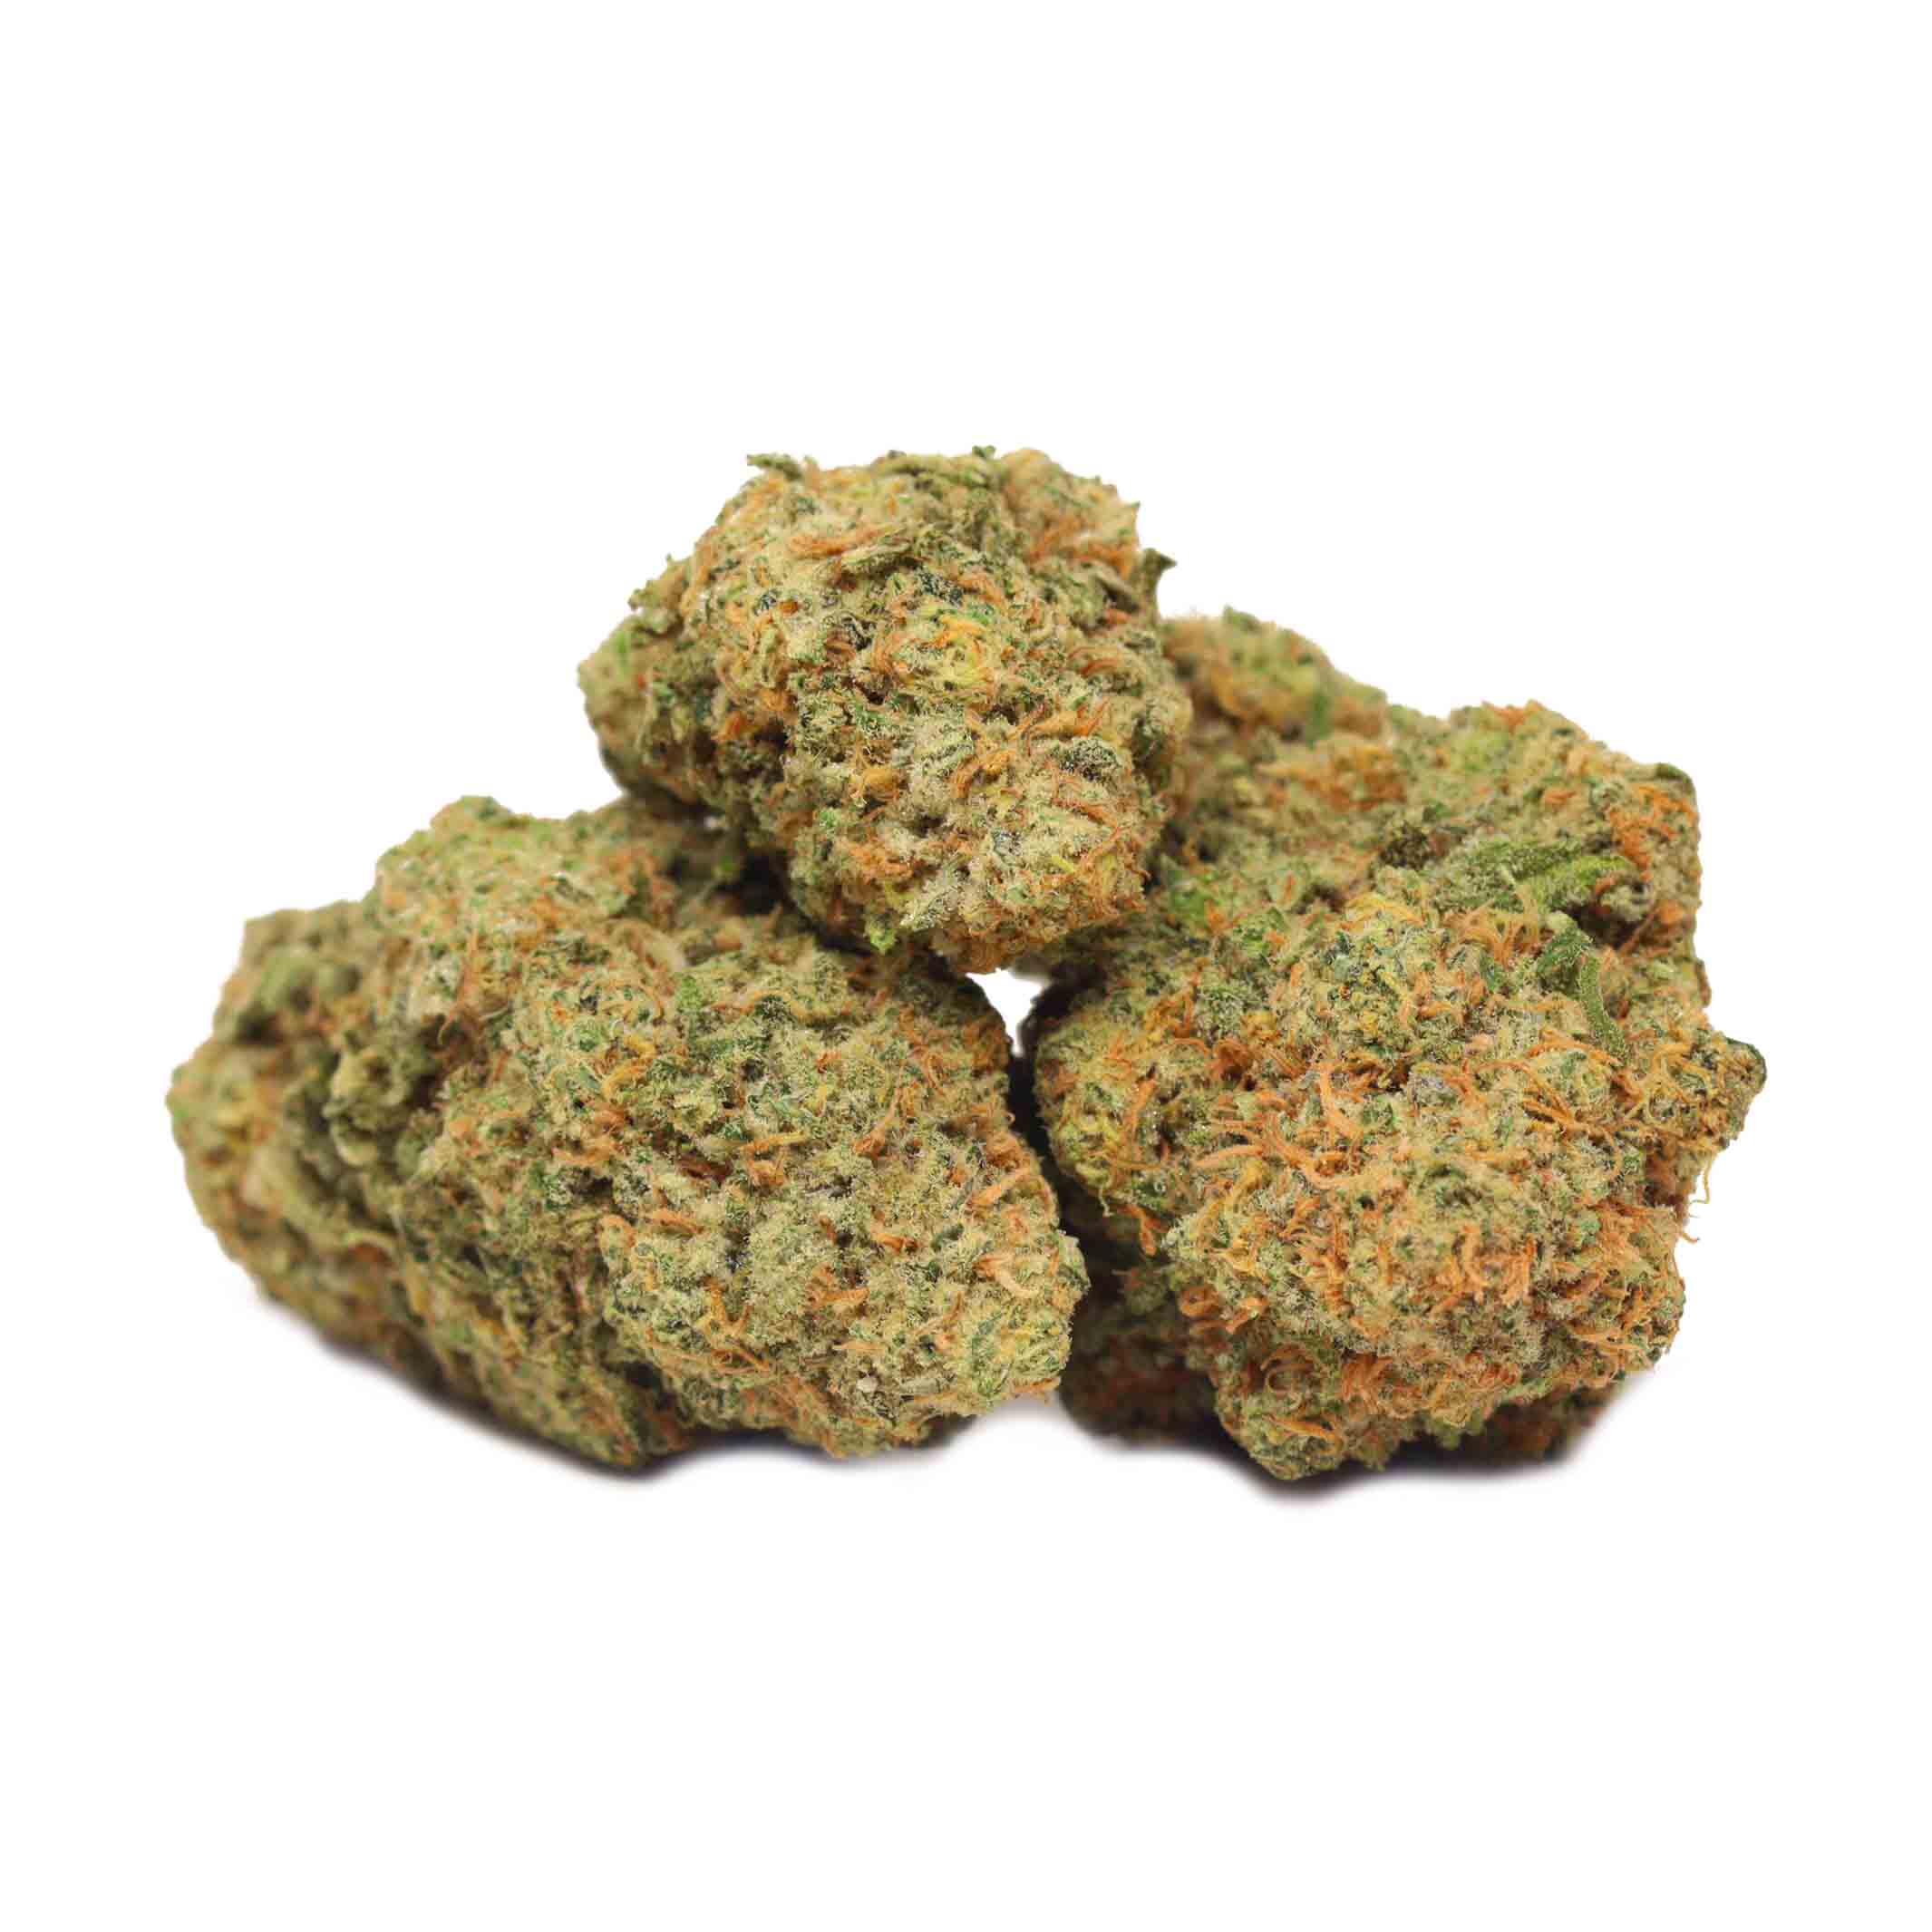 Buy Red Congolese Weed Online